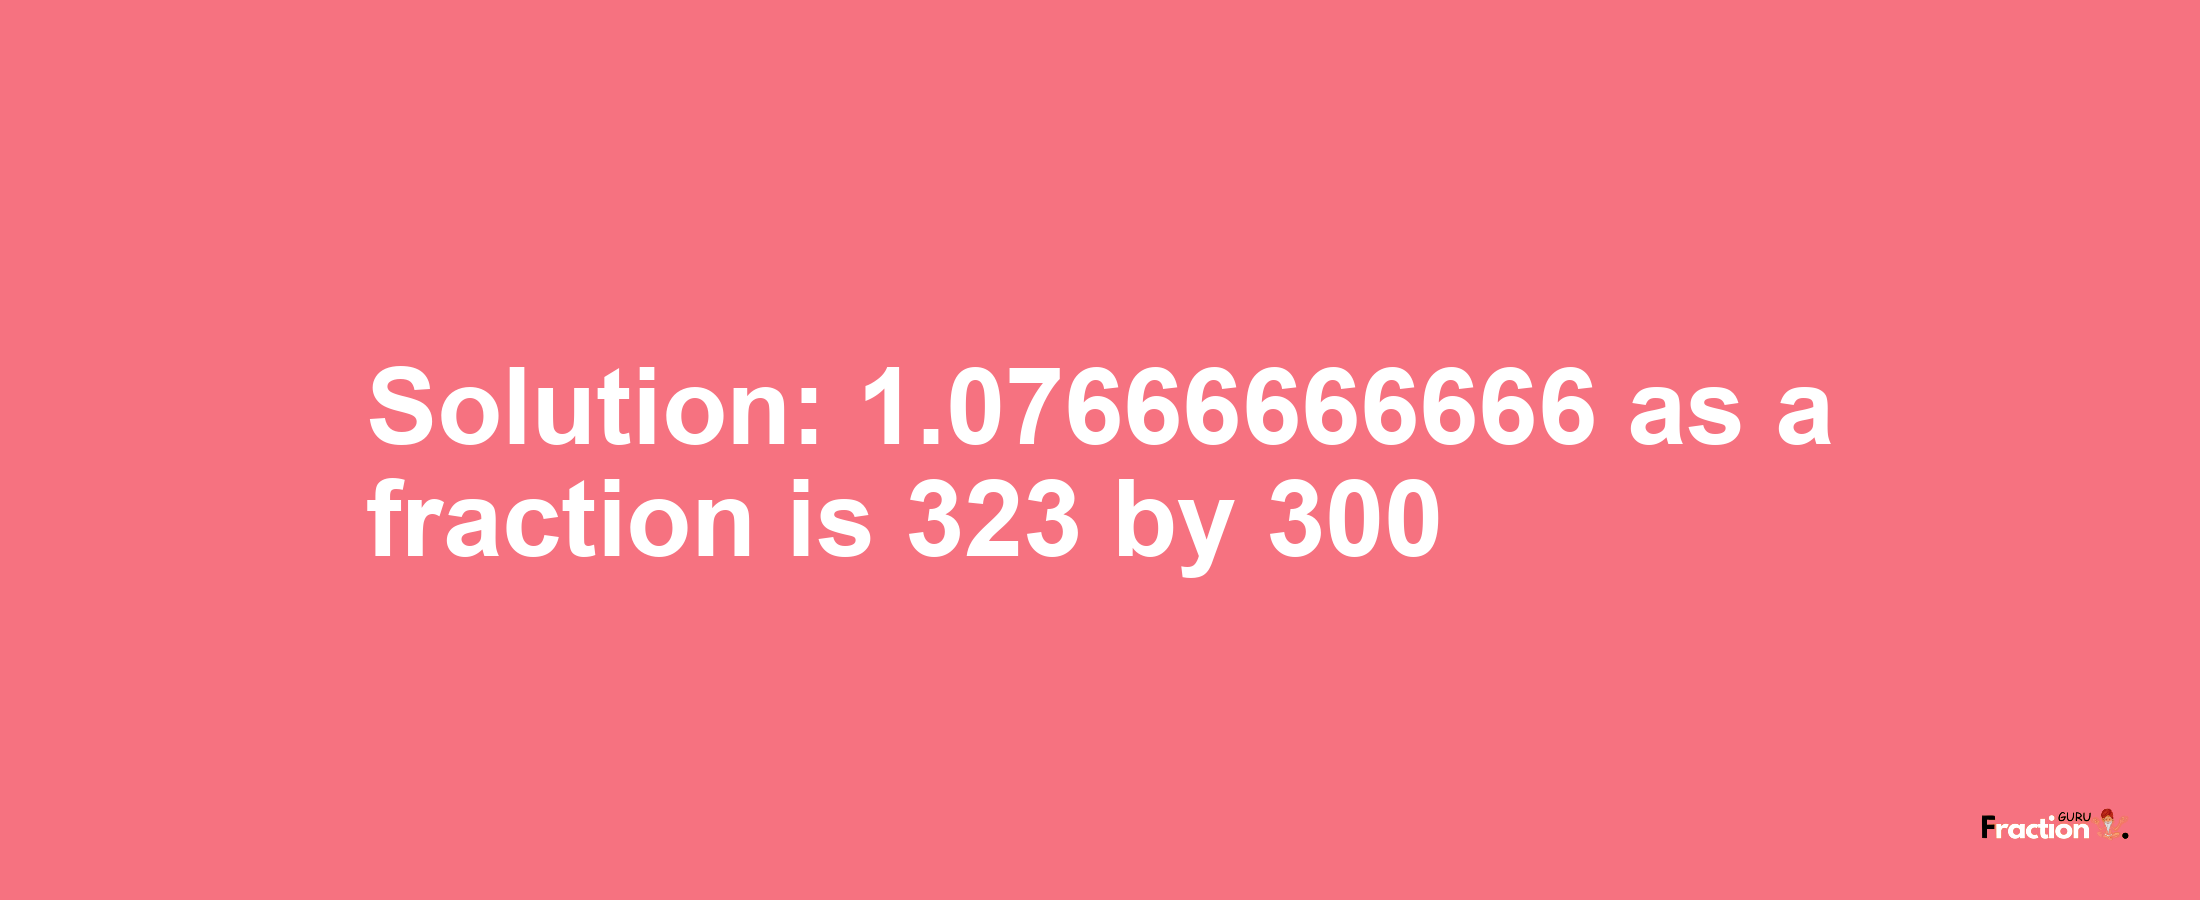 Solution:1.07666666666 as a fraction is 323/300